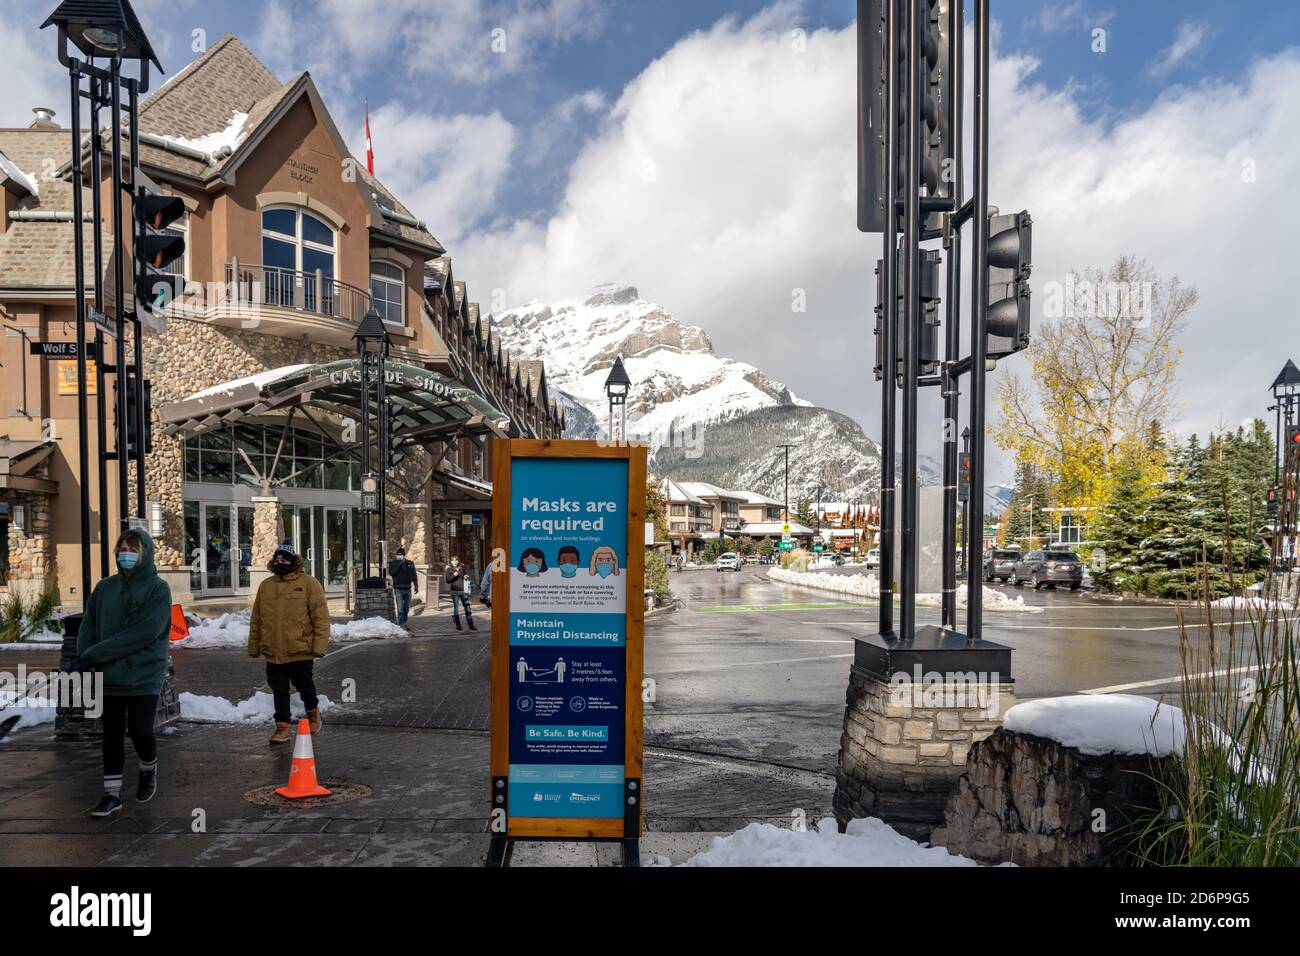 Street view of Banff Avenue in autumn and winter snowy season sunny day during covid-19 pandemic period. Banff, Alberta, Canada Stock Photo